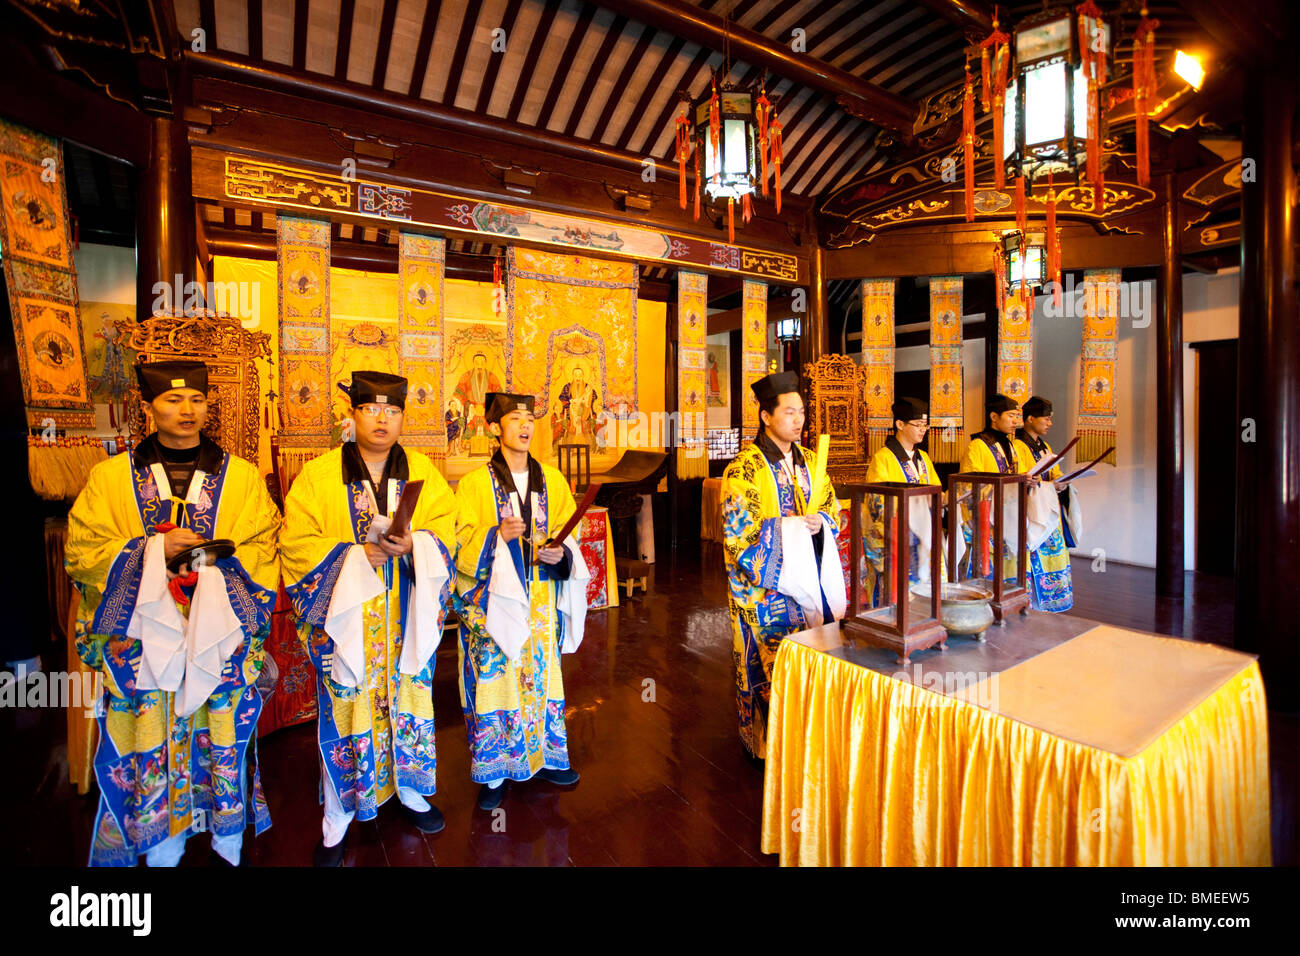 Taoist monks performing religious ritual, Cheng Huang Miao Temple, Shanghai, China Stock Photo